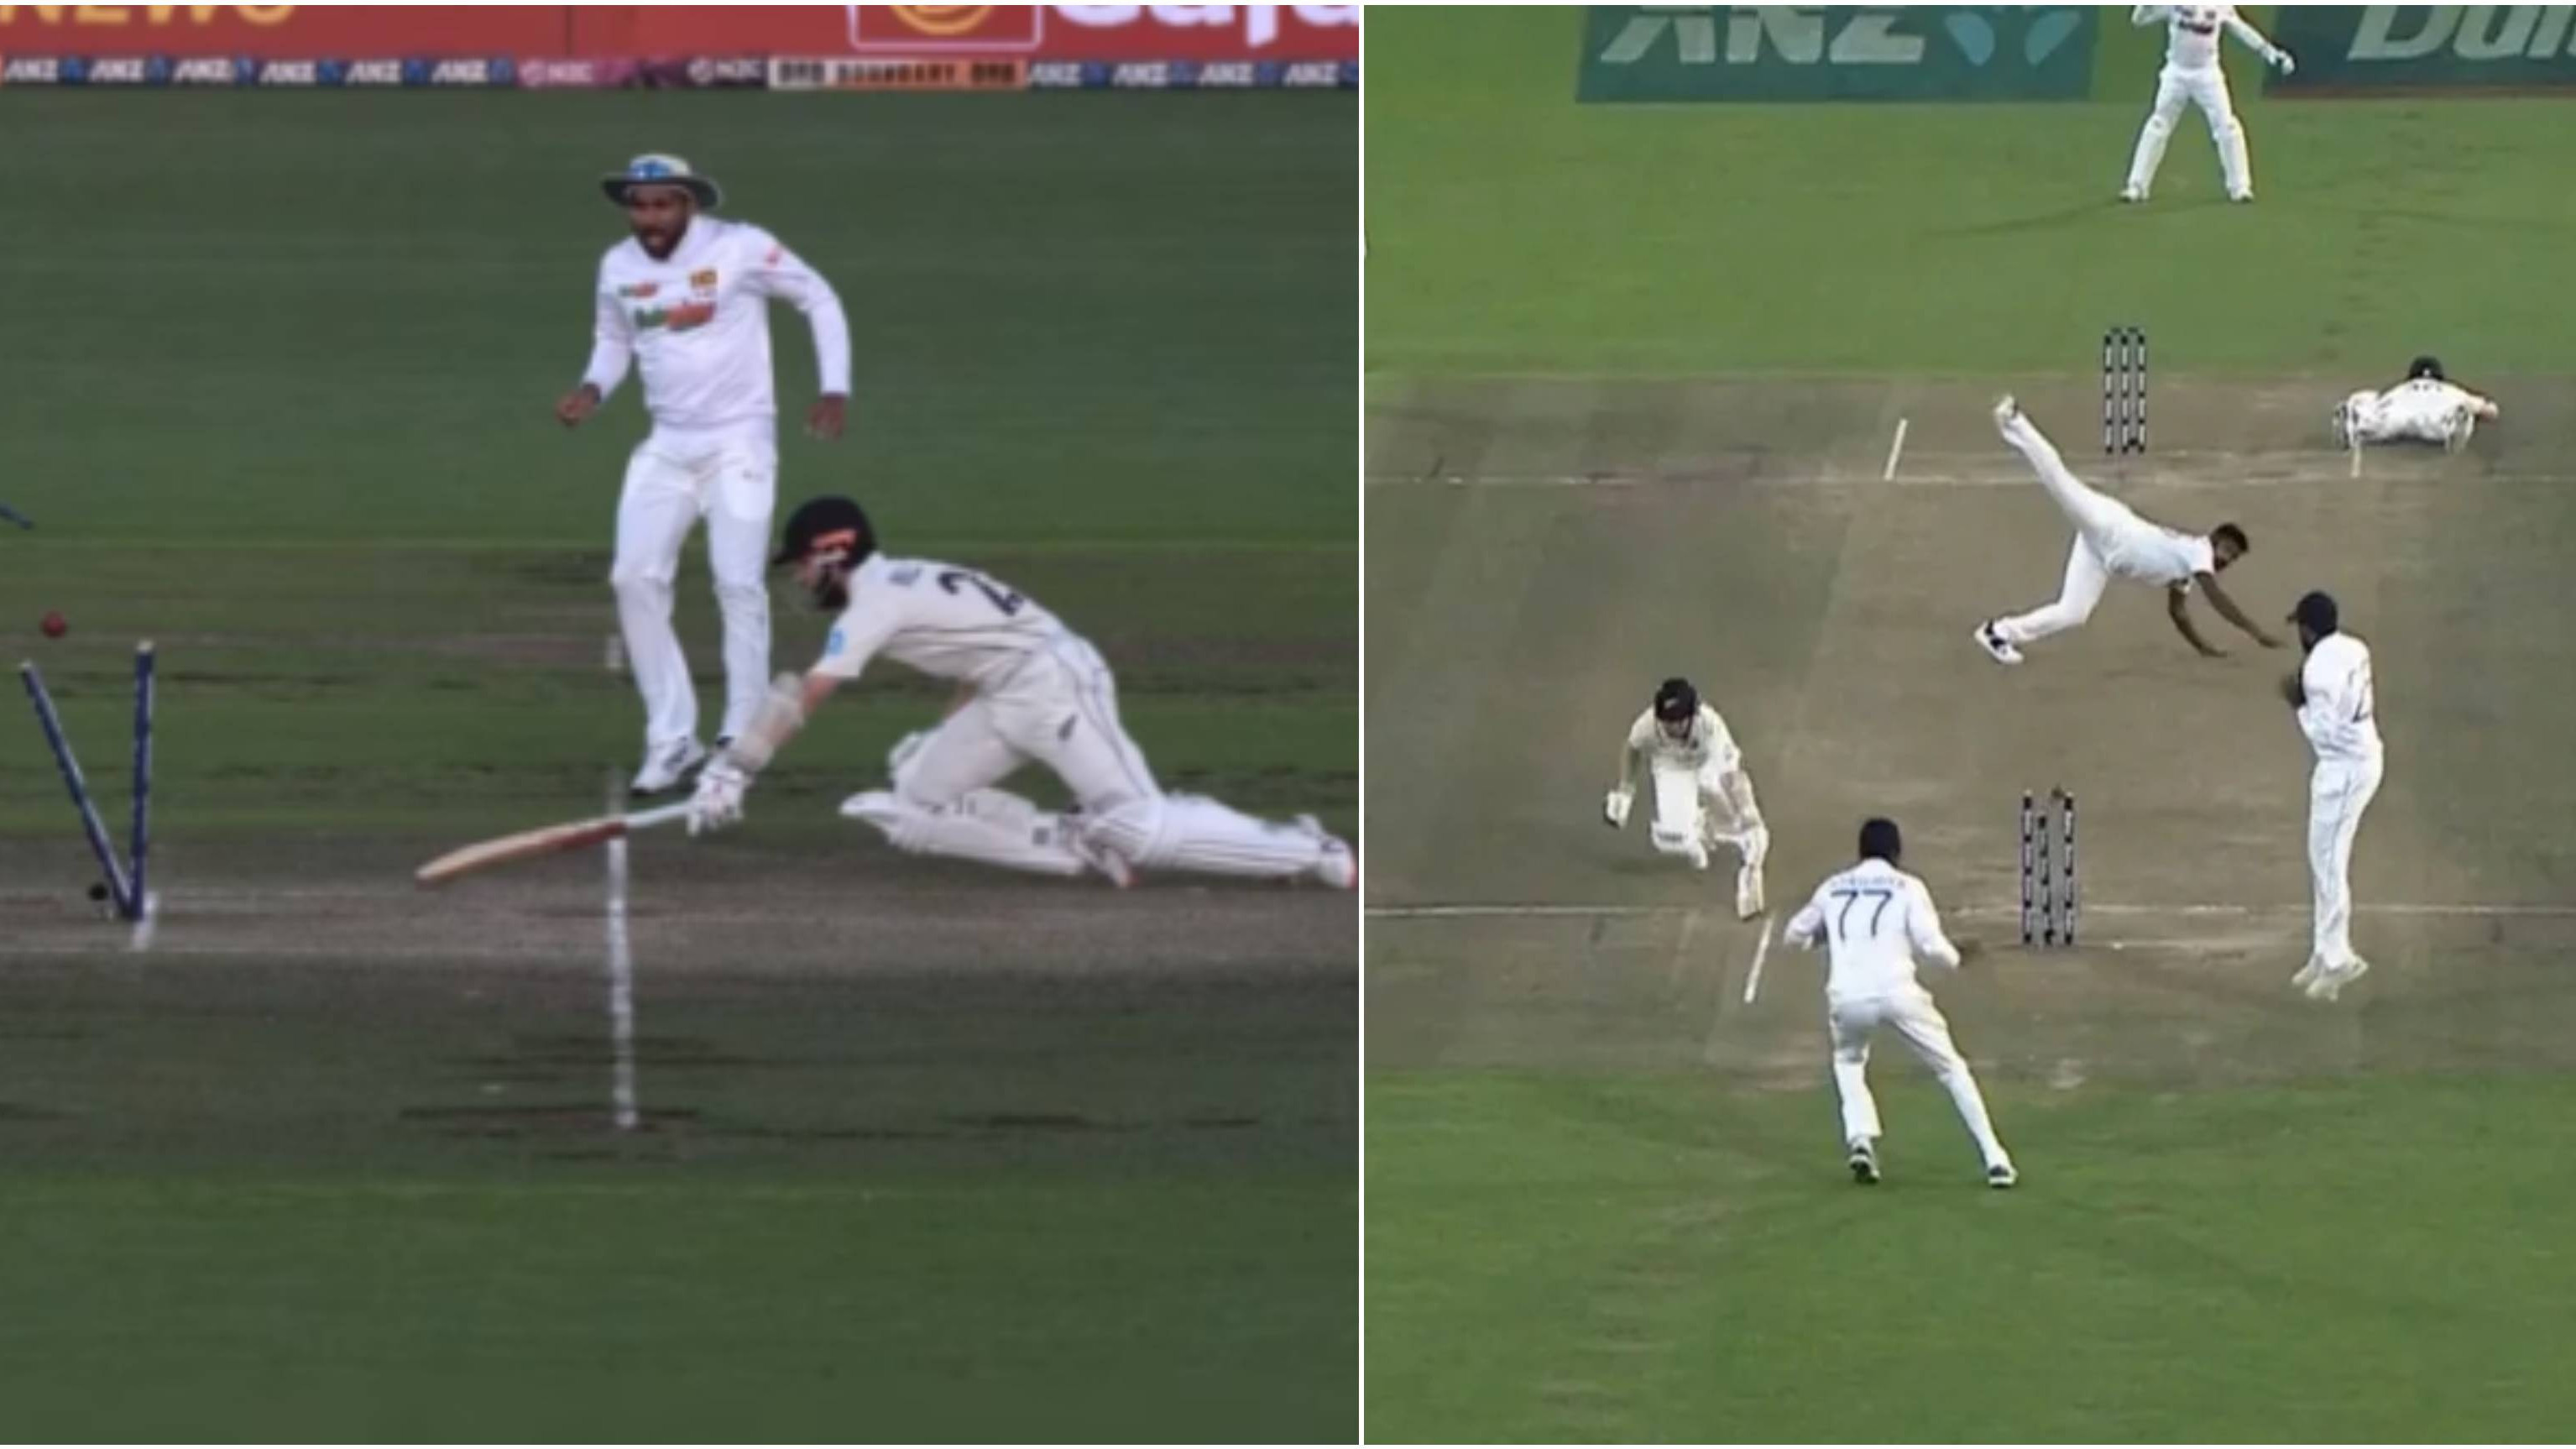 NZ v SL 2023: “I didn’t look overly agile there,” Williamson reflects on his diving single to win Christchurch Test